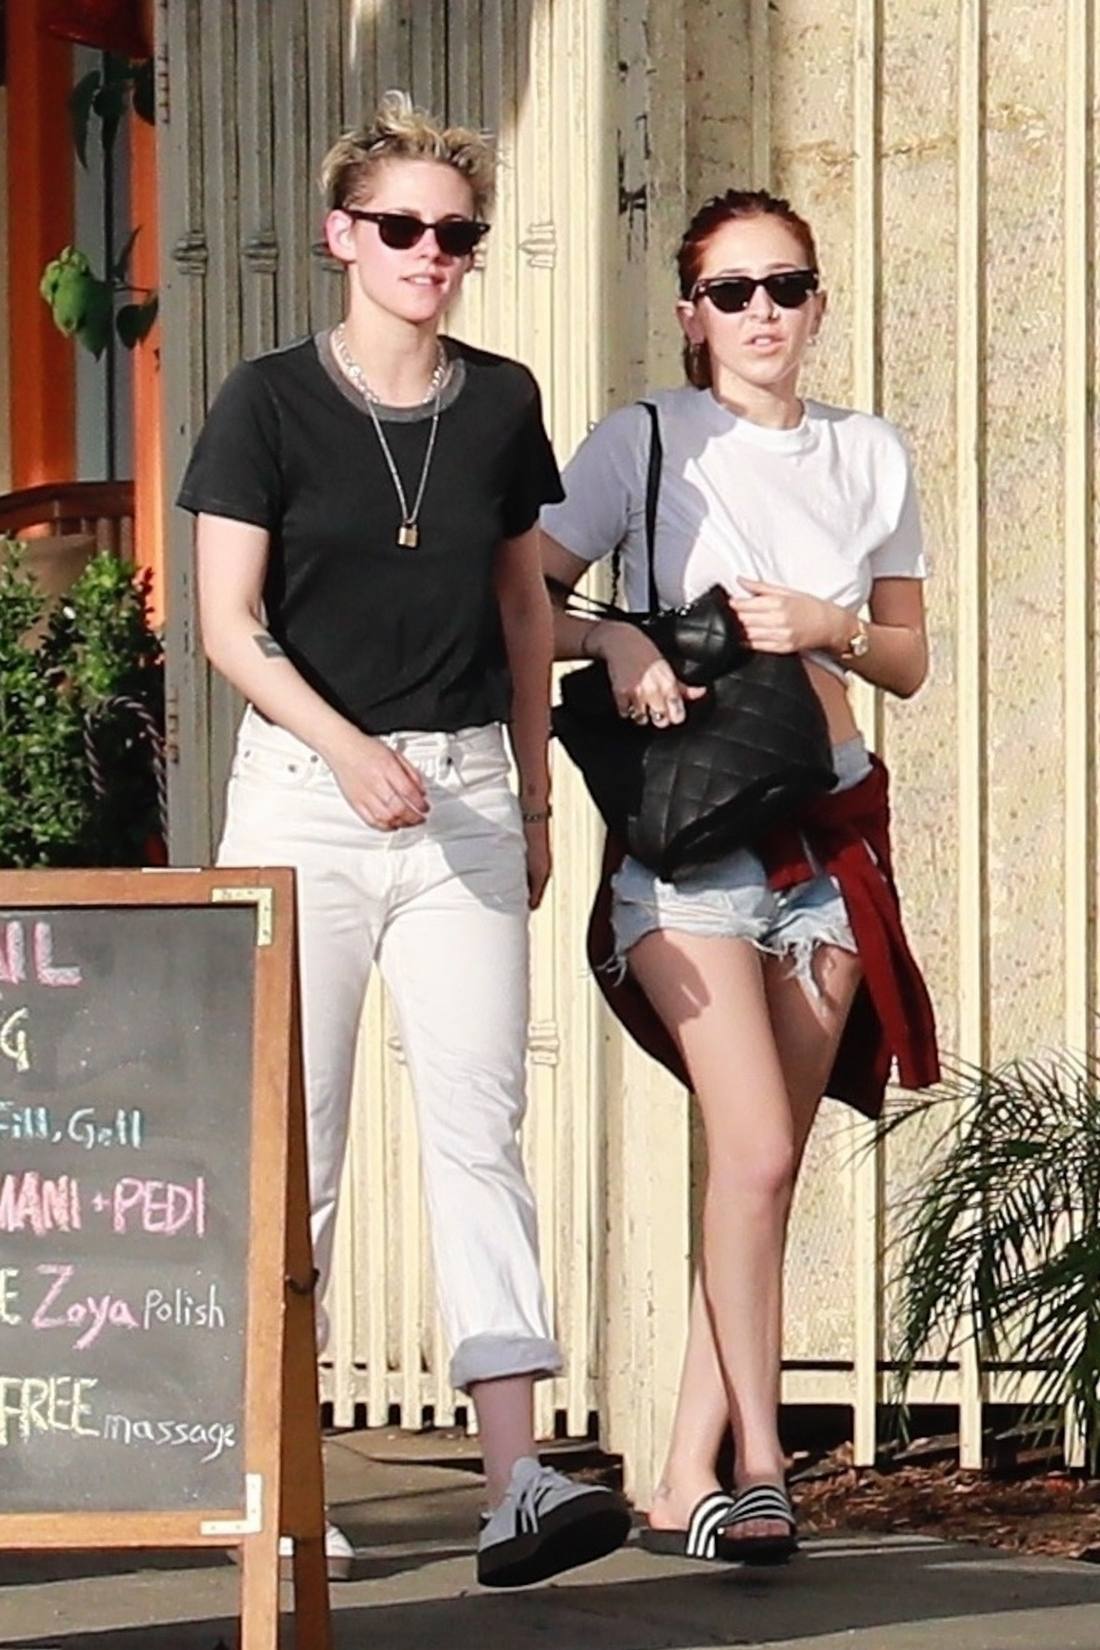 Kristen Stewart at spa and nail salon in Los Angeles, California on December 22